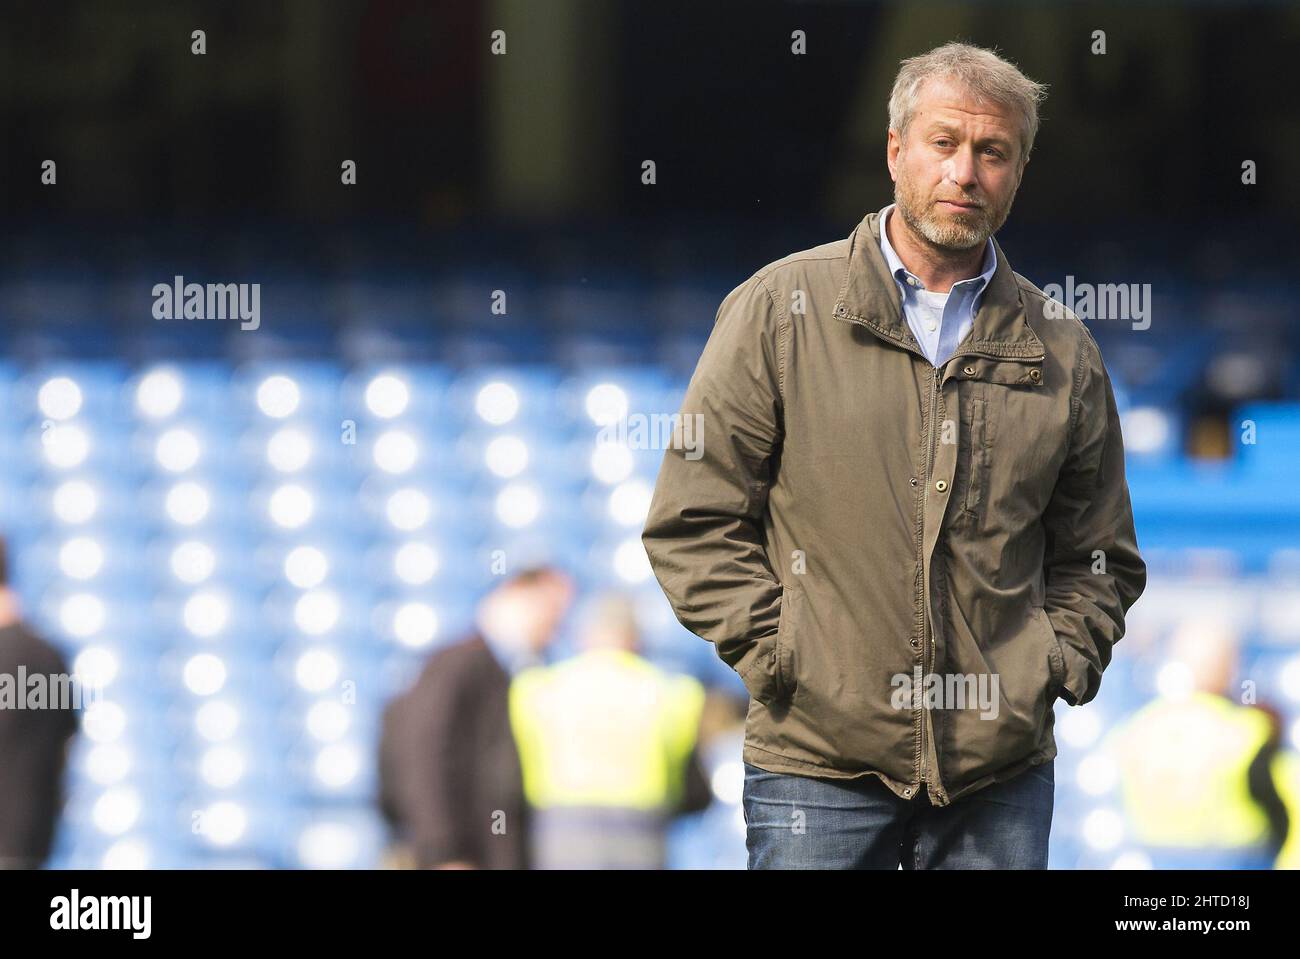 28 February 2022 - ROMAN ABRAMOVICH - CHELSEA FC   FILE PHOTO  ROMAN Abramovich WALKS ACROSS THE PITCH AT STAMFORD BRIDGE AFTER GOING IN TO SEE THE TEAM AFTER THE MATCH AS CHELSEA WIN THE PREMIERSHIP TITLE Chelsea v Crystal Palace Barclays Premiership - Stamford Bridge  Chelsea v Crystal Palace, Barclays Premier League, Stamford Bridge, London, Britain - 03 May 2015 Picture : © Mark Pain / Alamy Live News Stock Photo